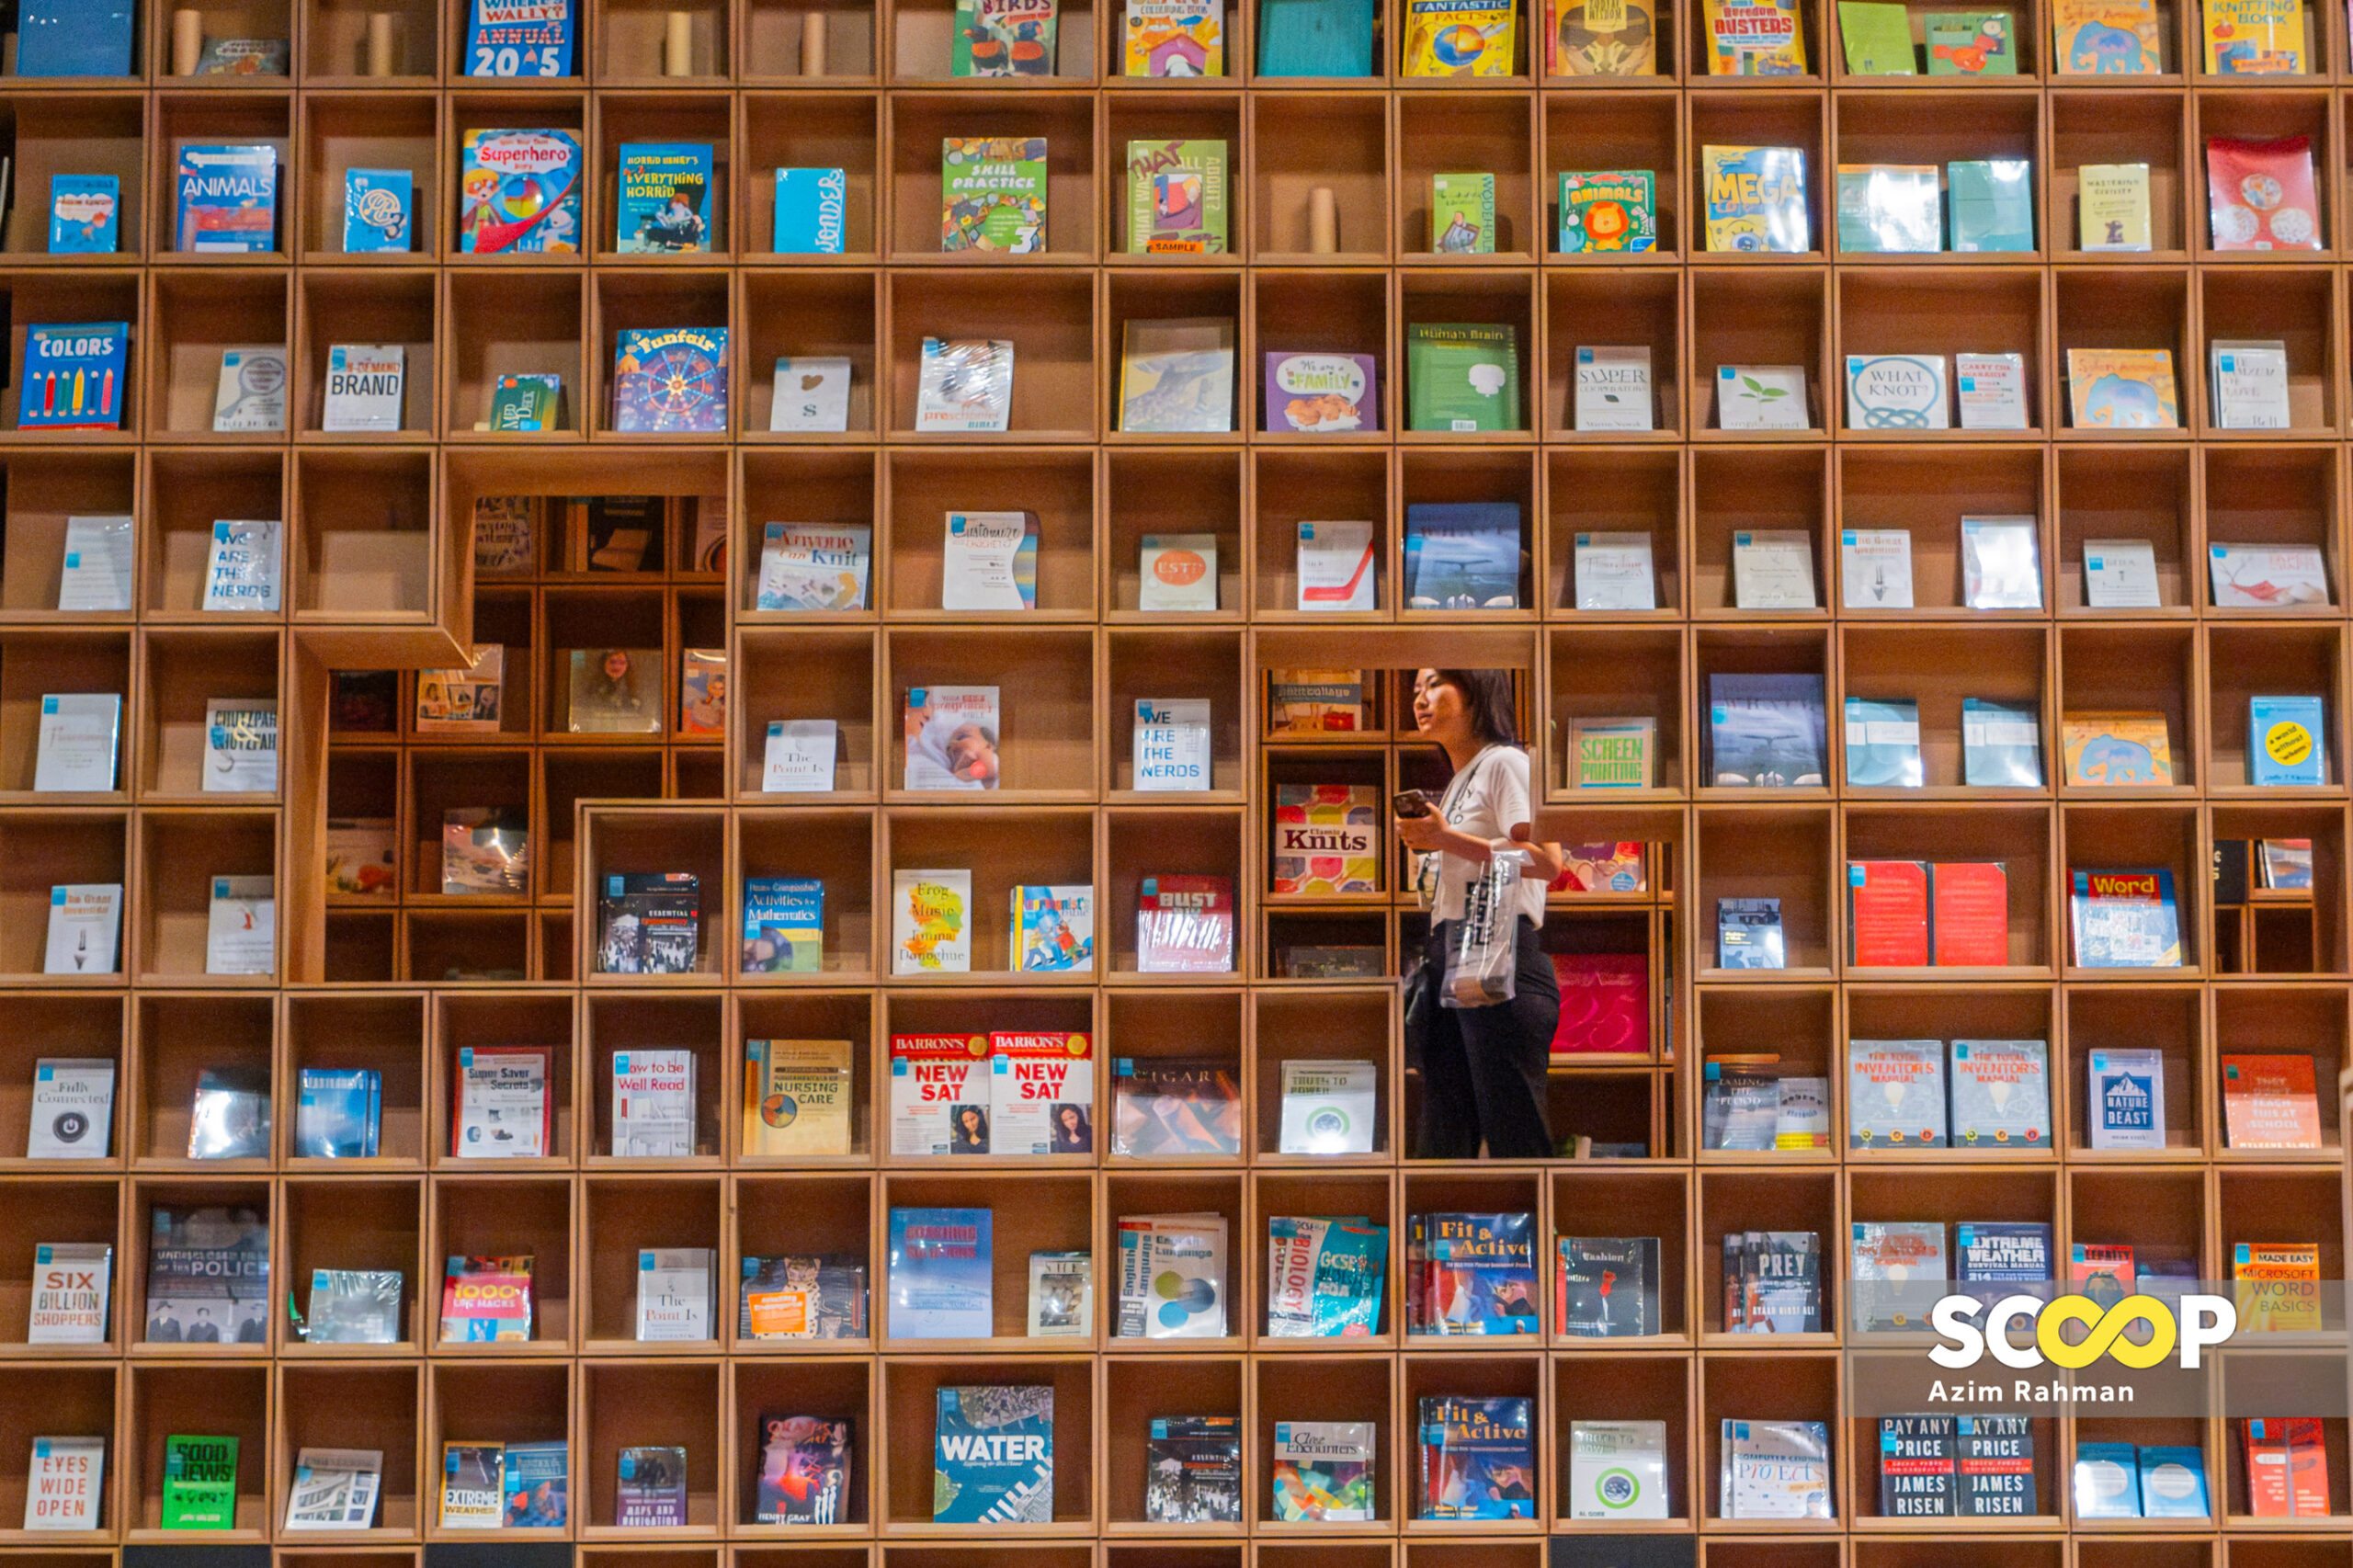 Photo of the day: BookXcess Rex KL beckons with 80,000 books, photogenic charm